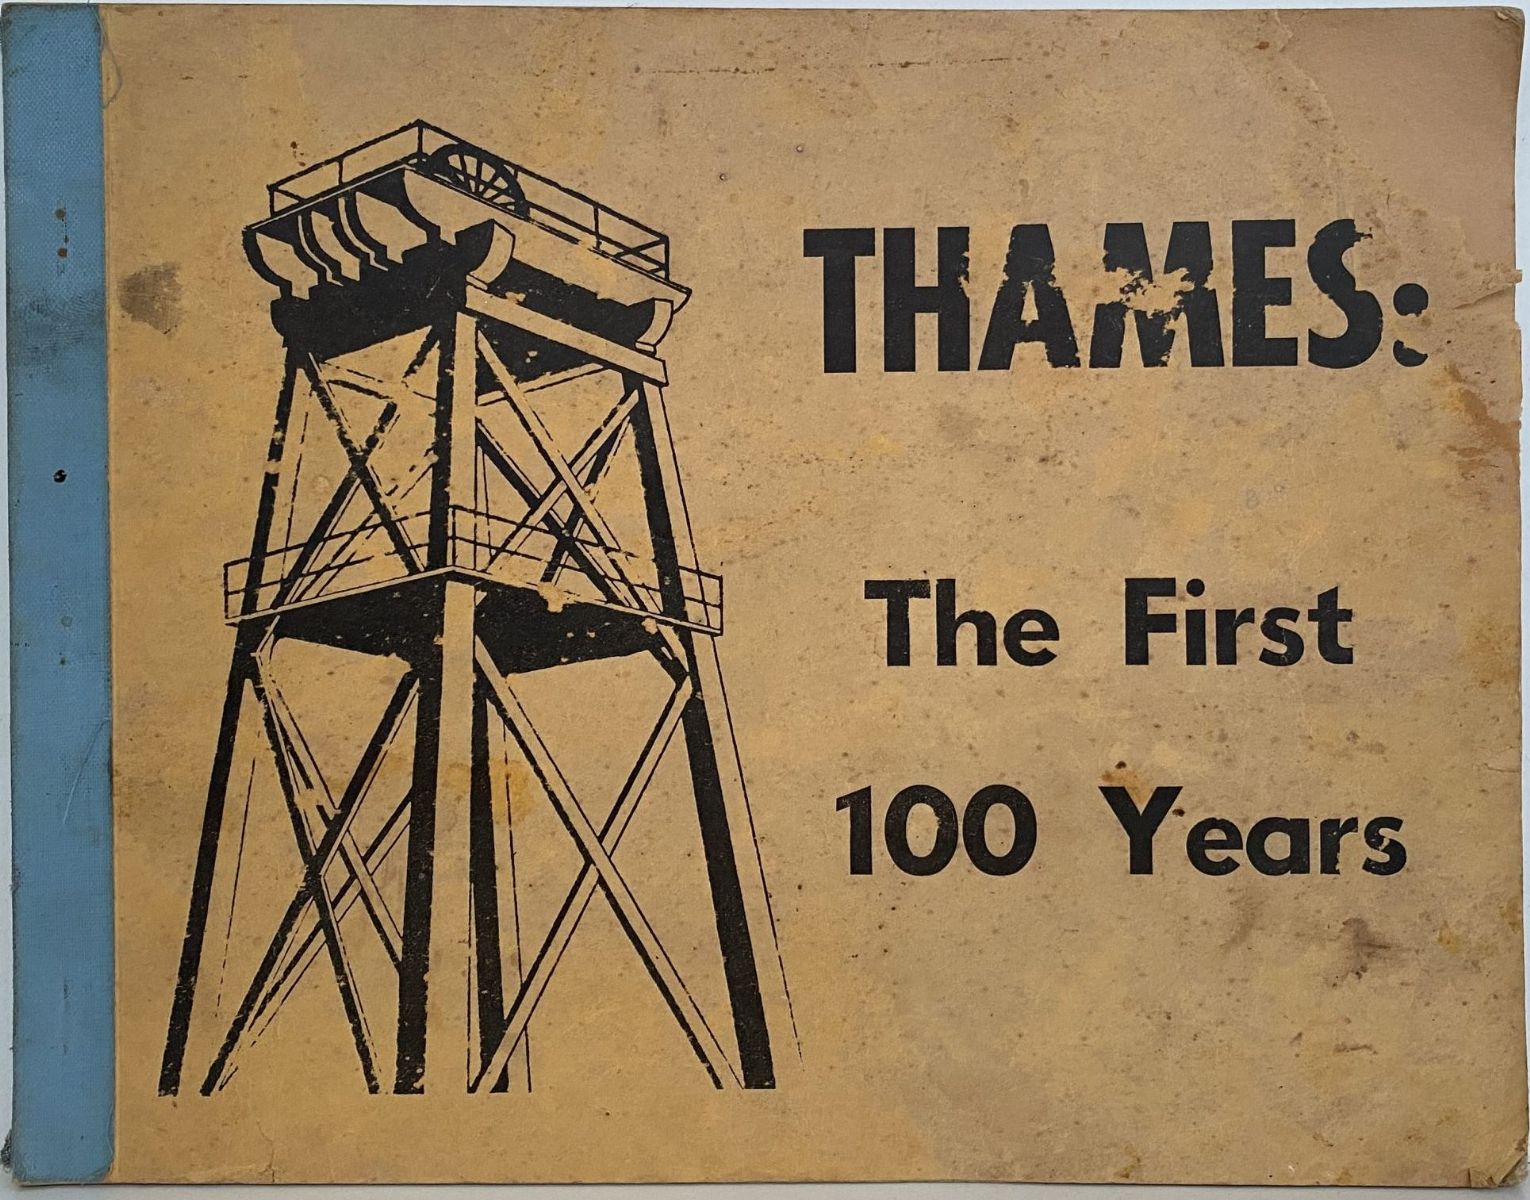 THAMES: The First 100 Years